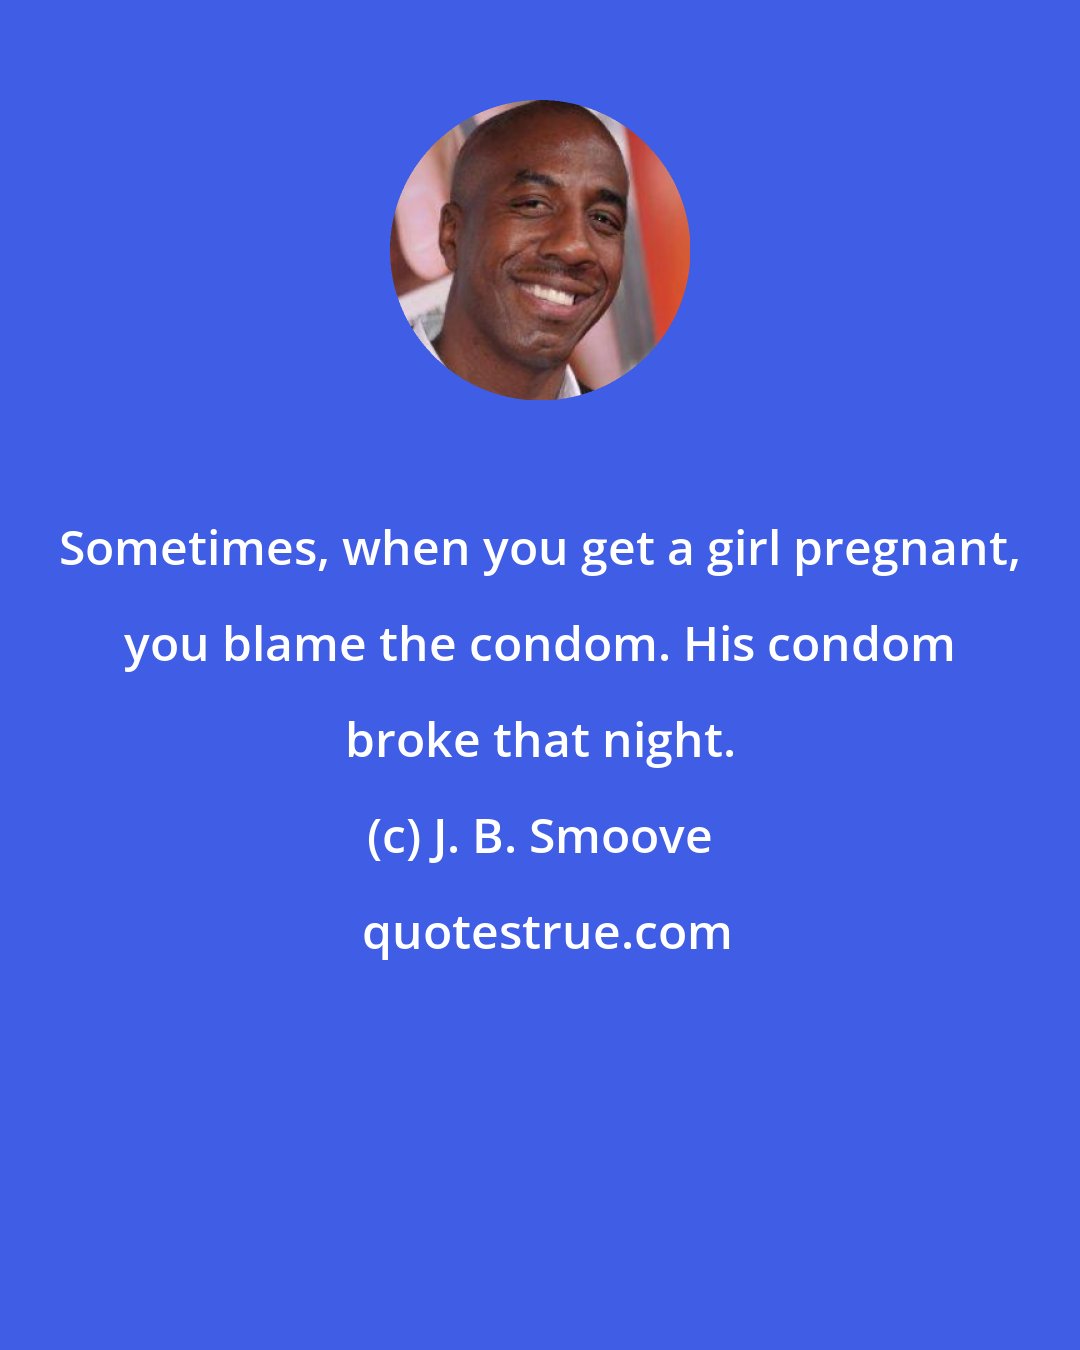 J. B. Smoove: Sometimes, when you get a girl pregnant, you blame the condom. His condom broke that night.